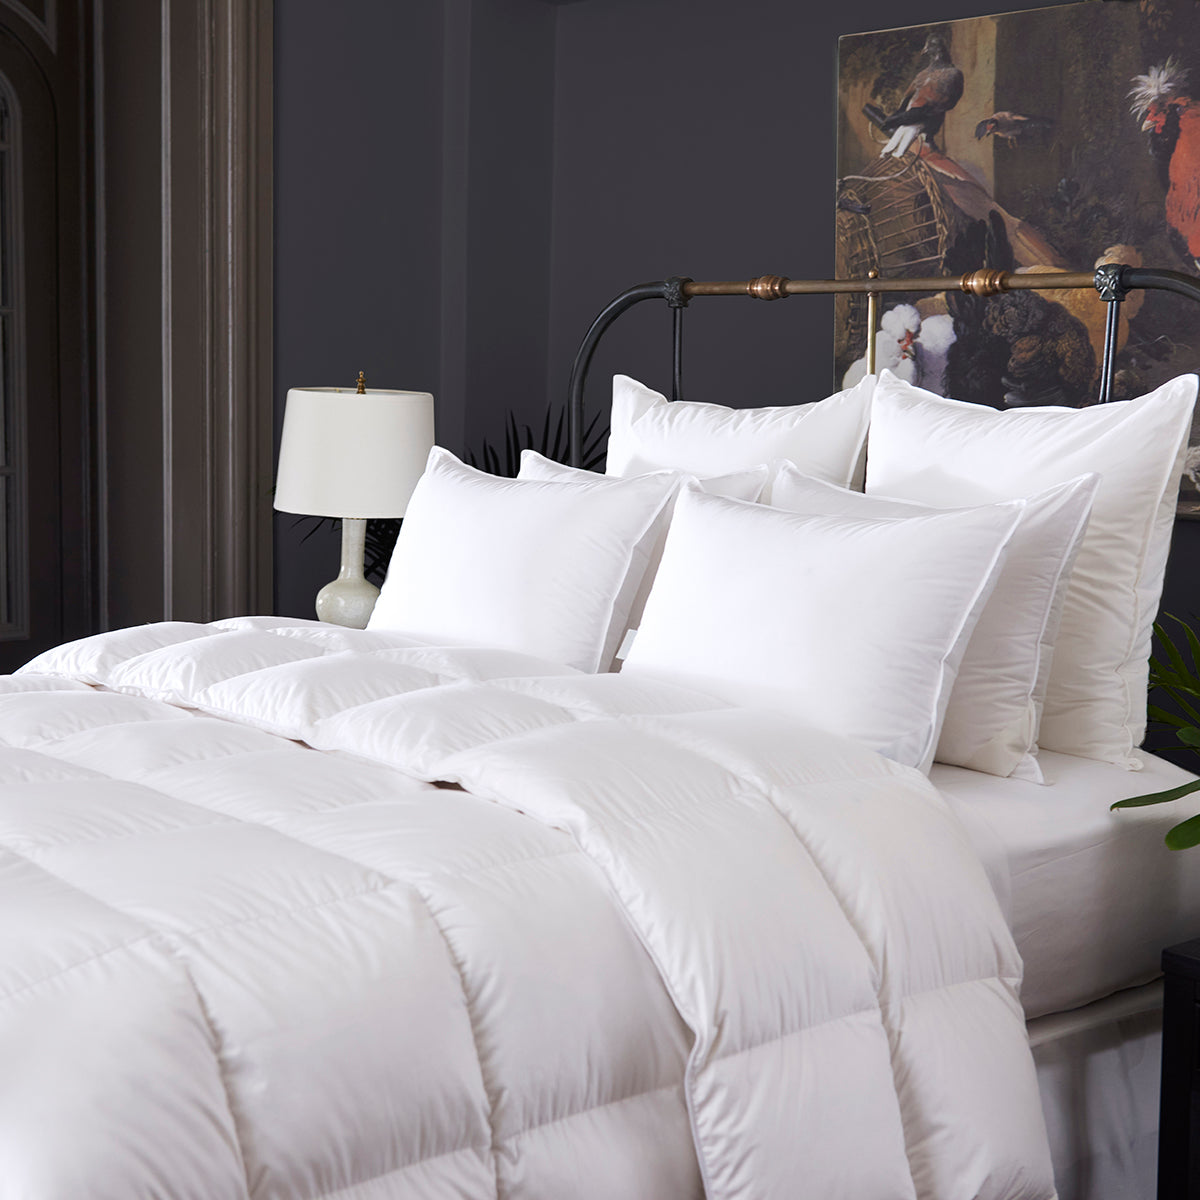 Image of a bed made with a white, fluffy down comforter and many pillows